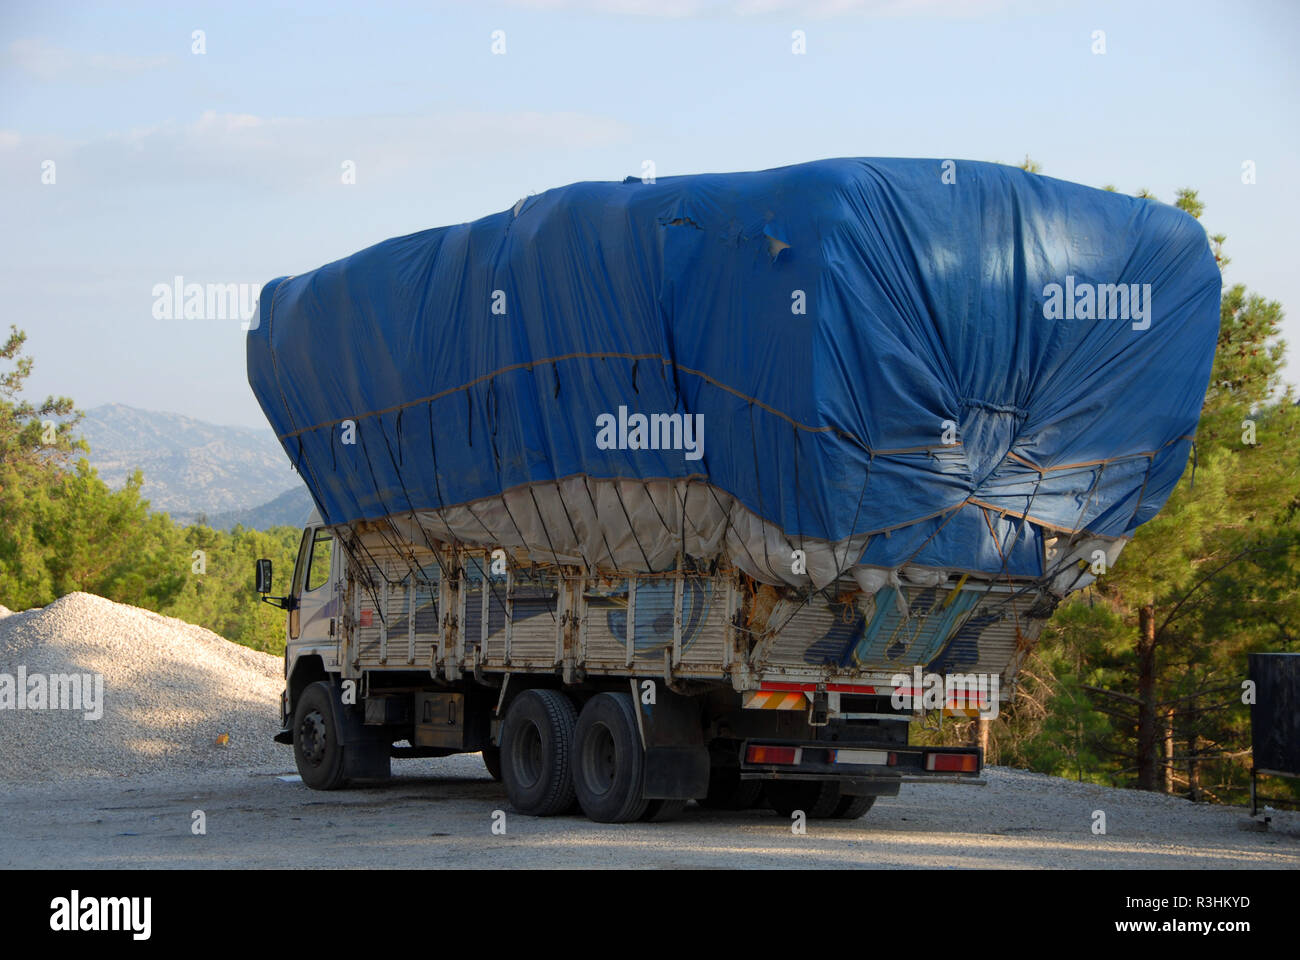 Truck Travelling On Roadway Heavily Overloaded By Wood Stock Photo -  Download Image Now - iStock